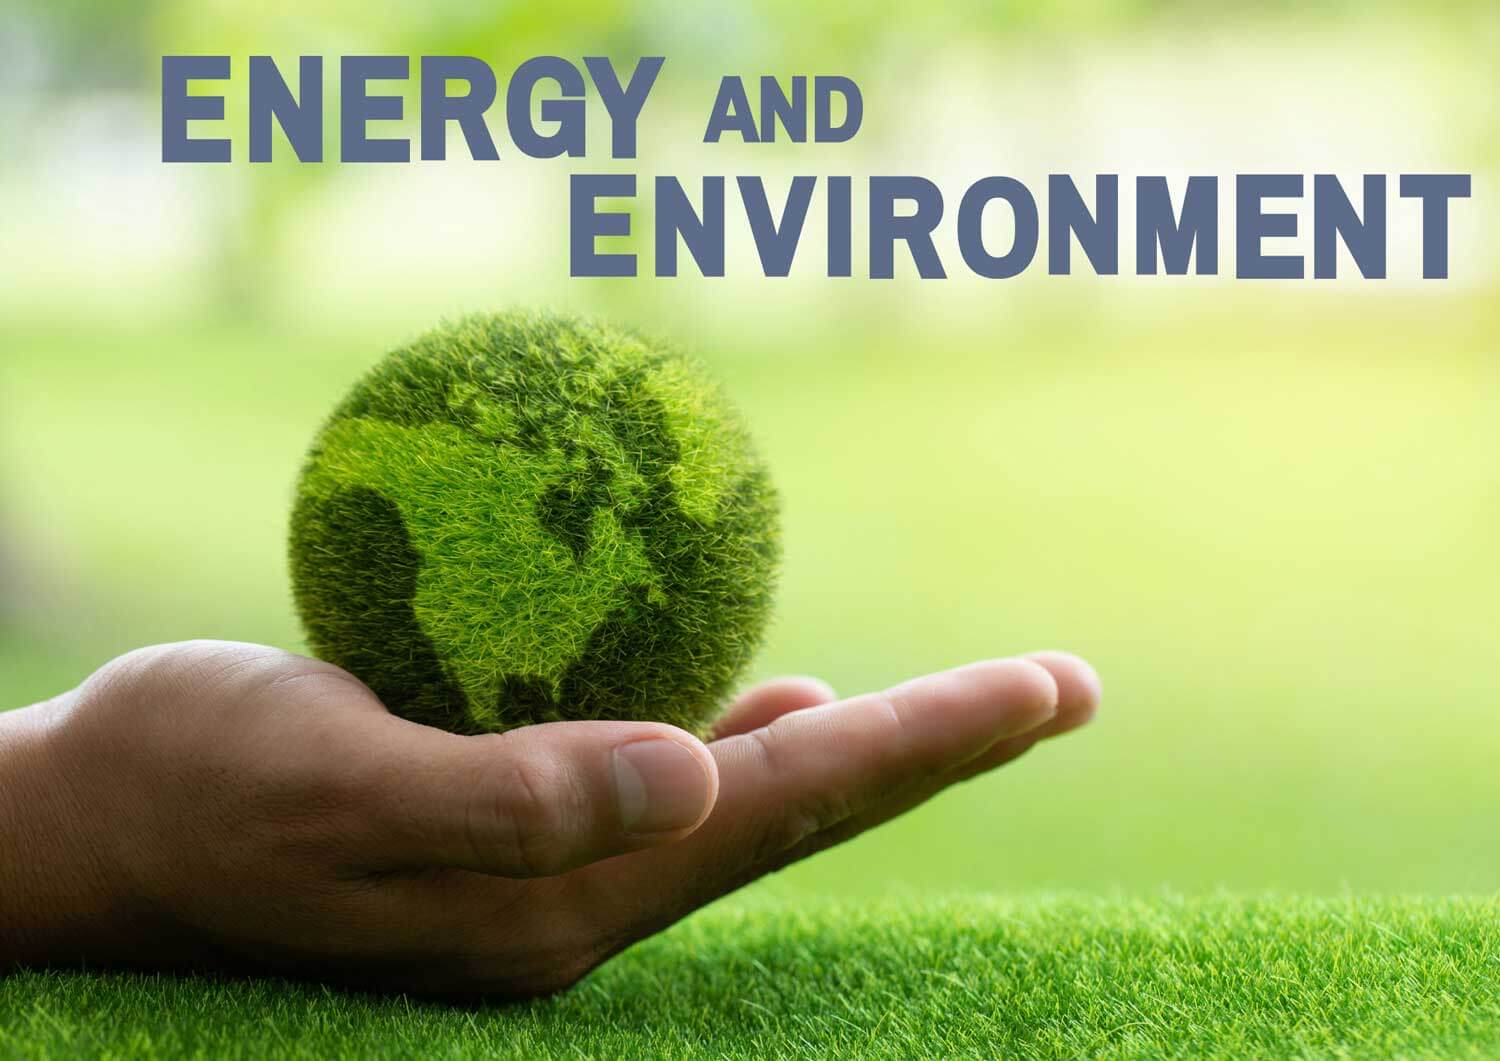 Energy and Environment